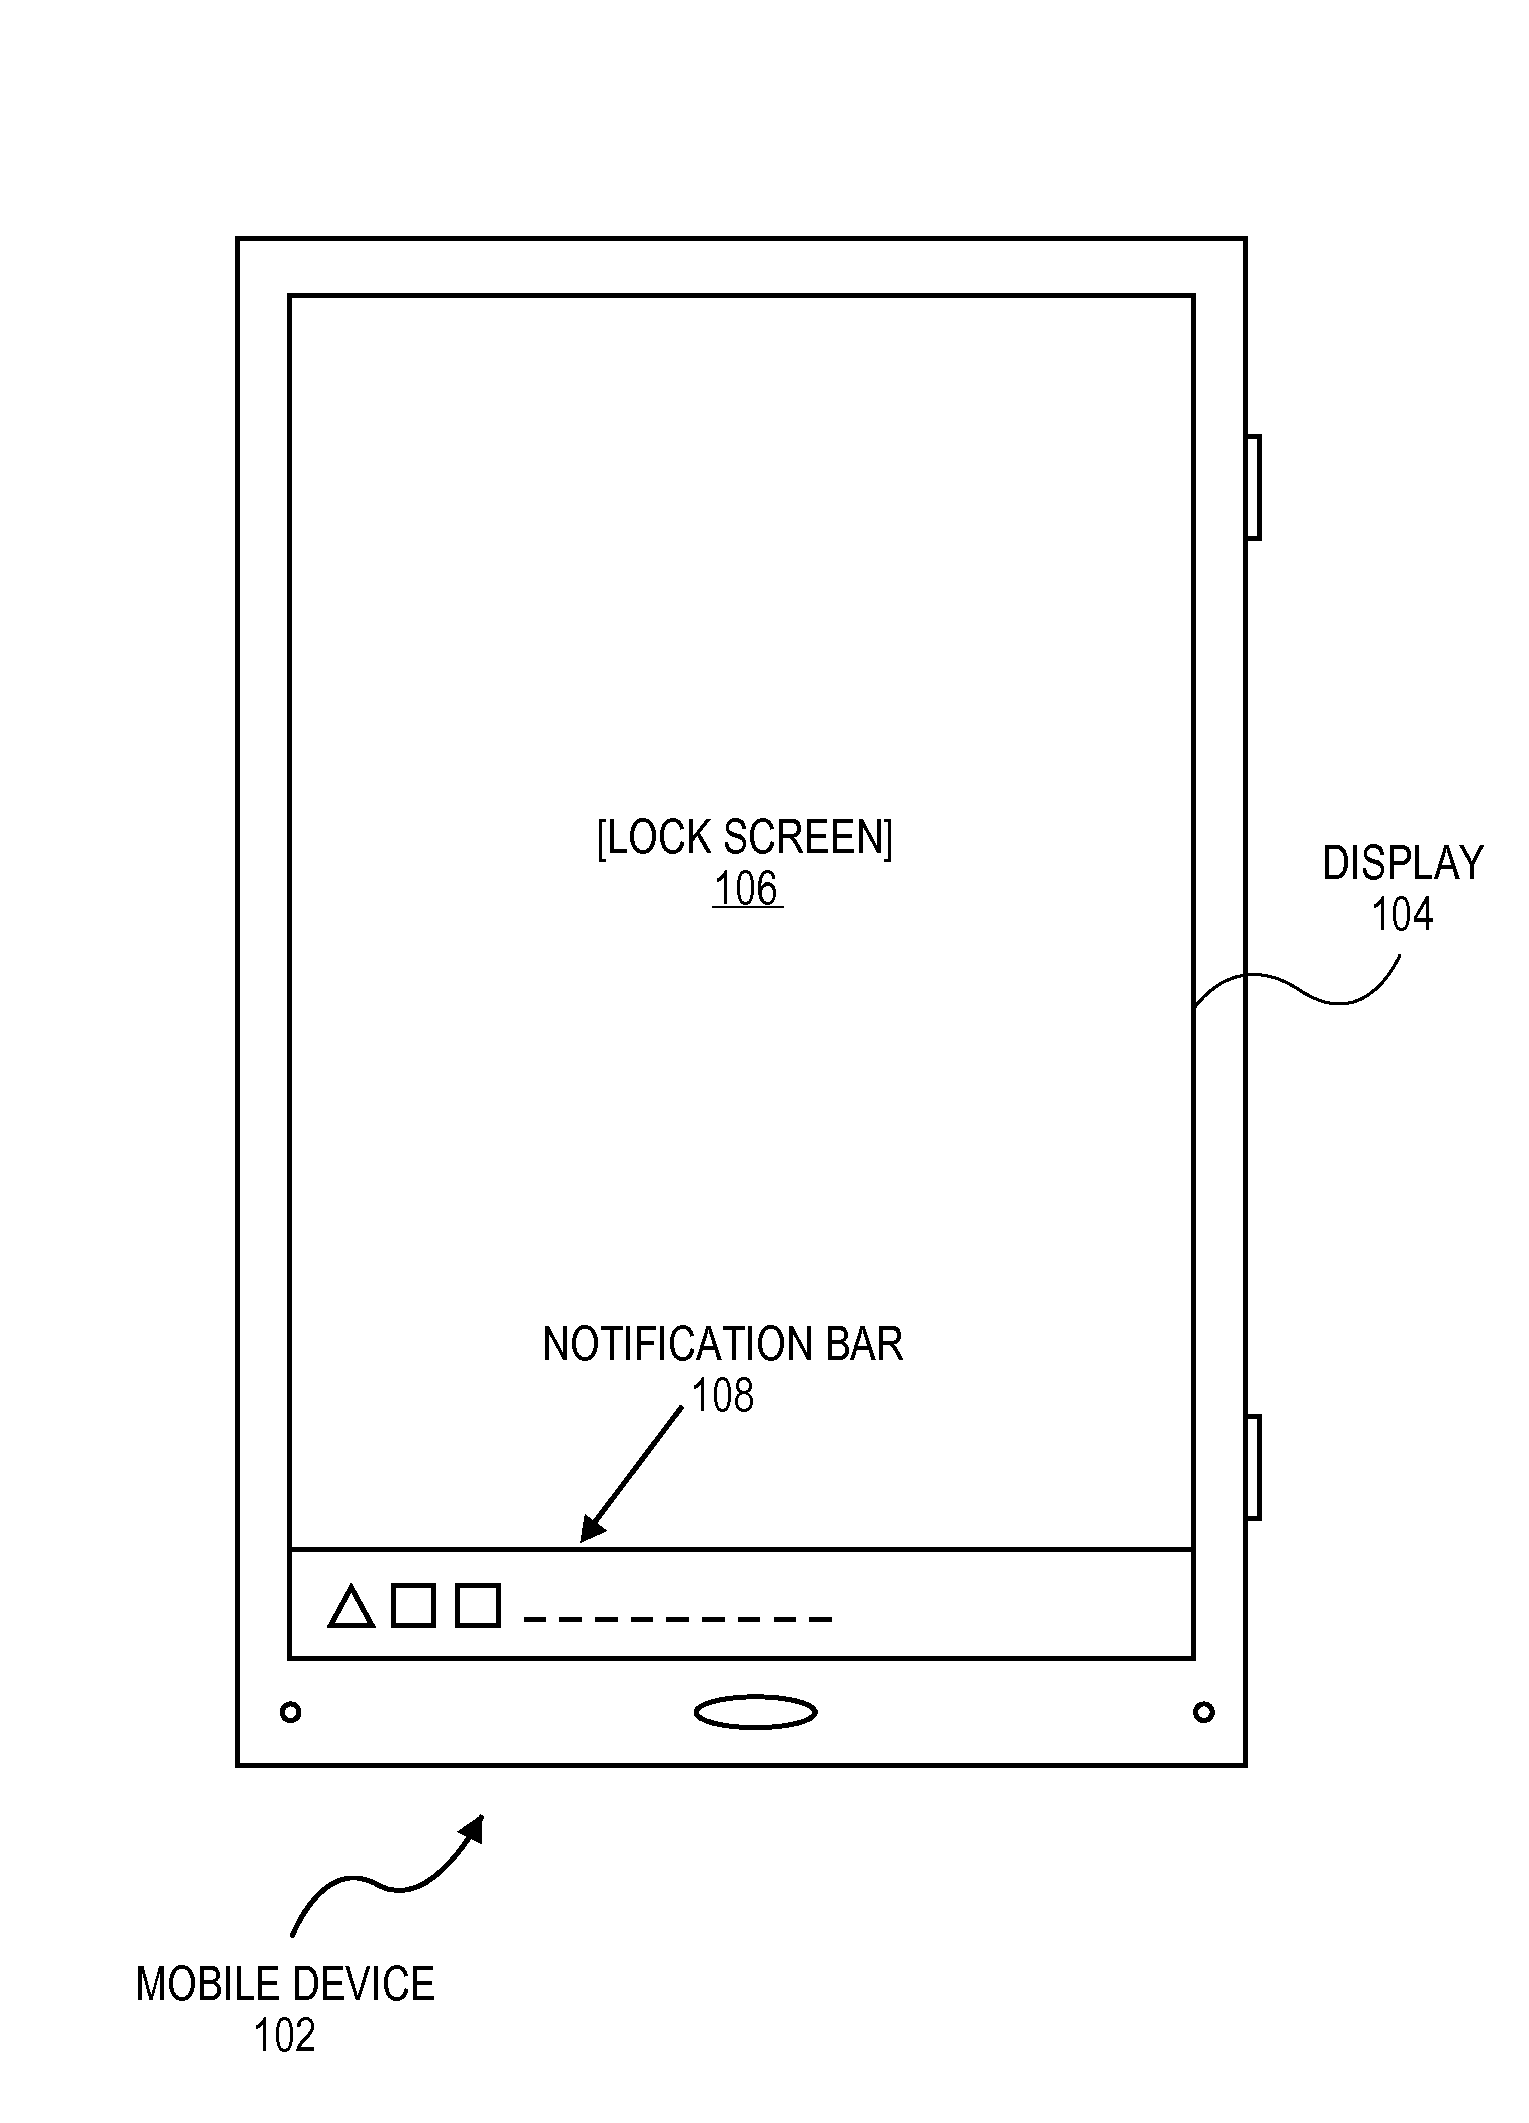 Extending mobile applications to the lock screen of a mobile device